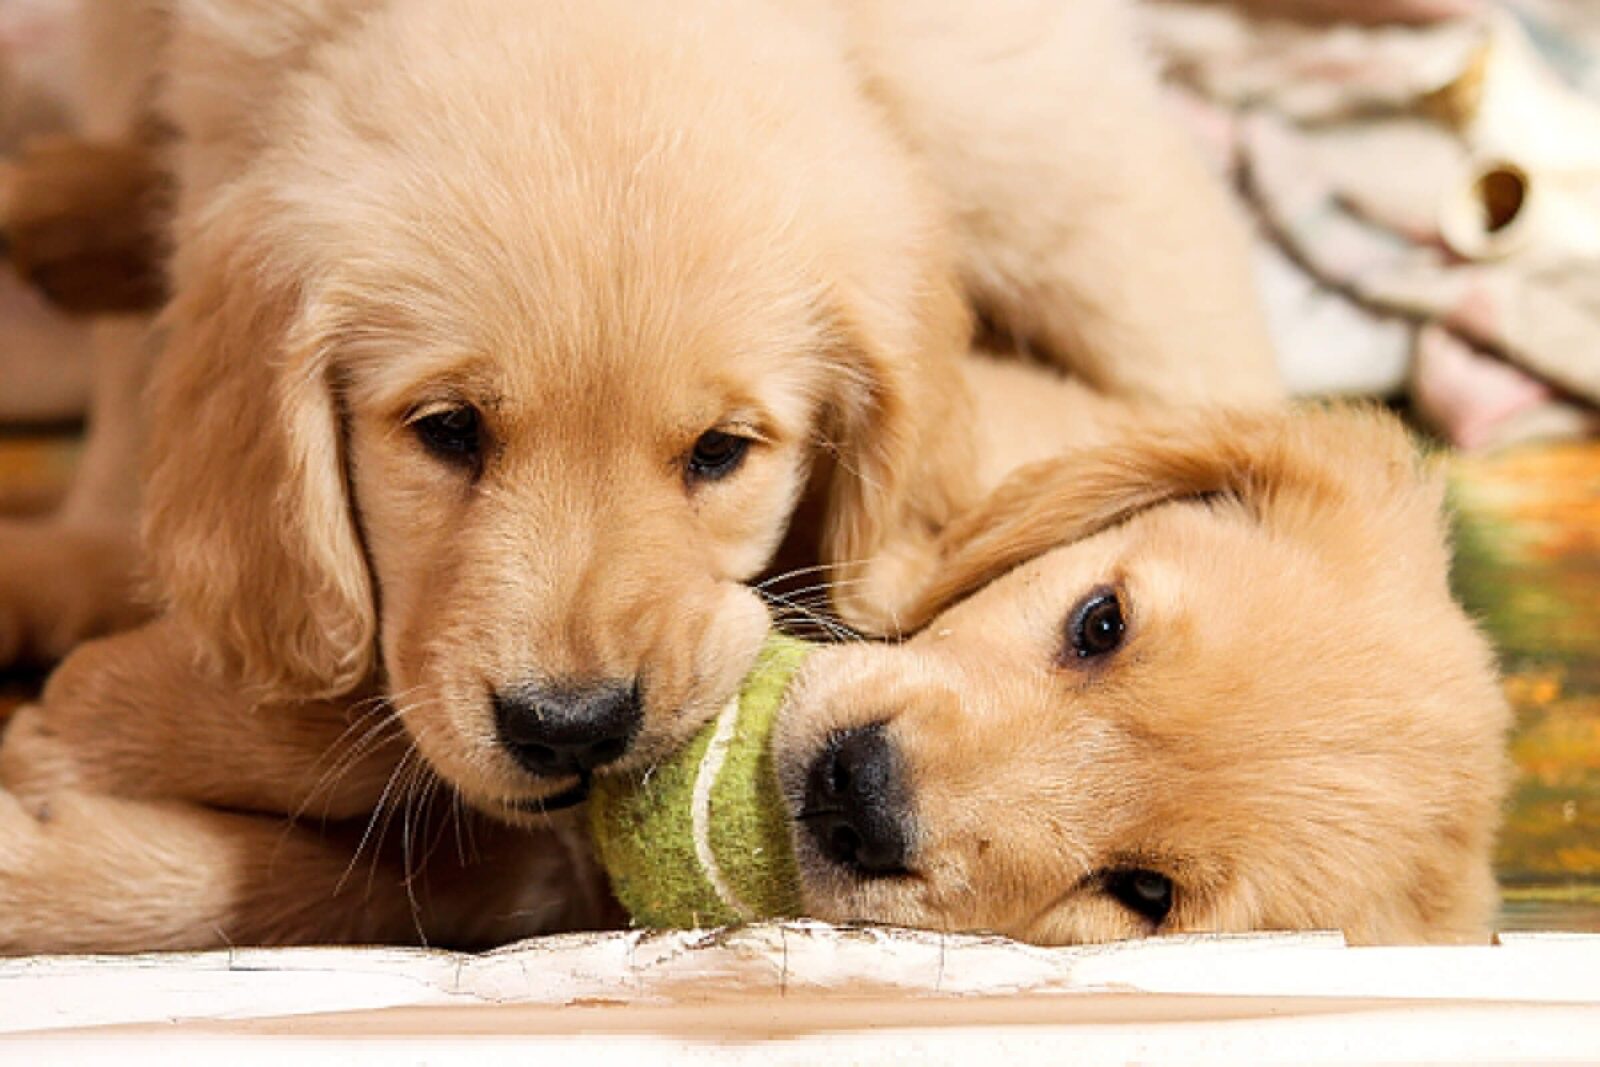 Can You Pass This General Knowledge Quiz While Being Distracted by Cute Puppies? Cute Dog Puppy 2